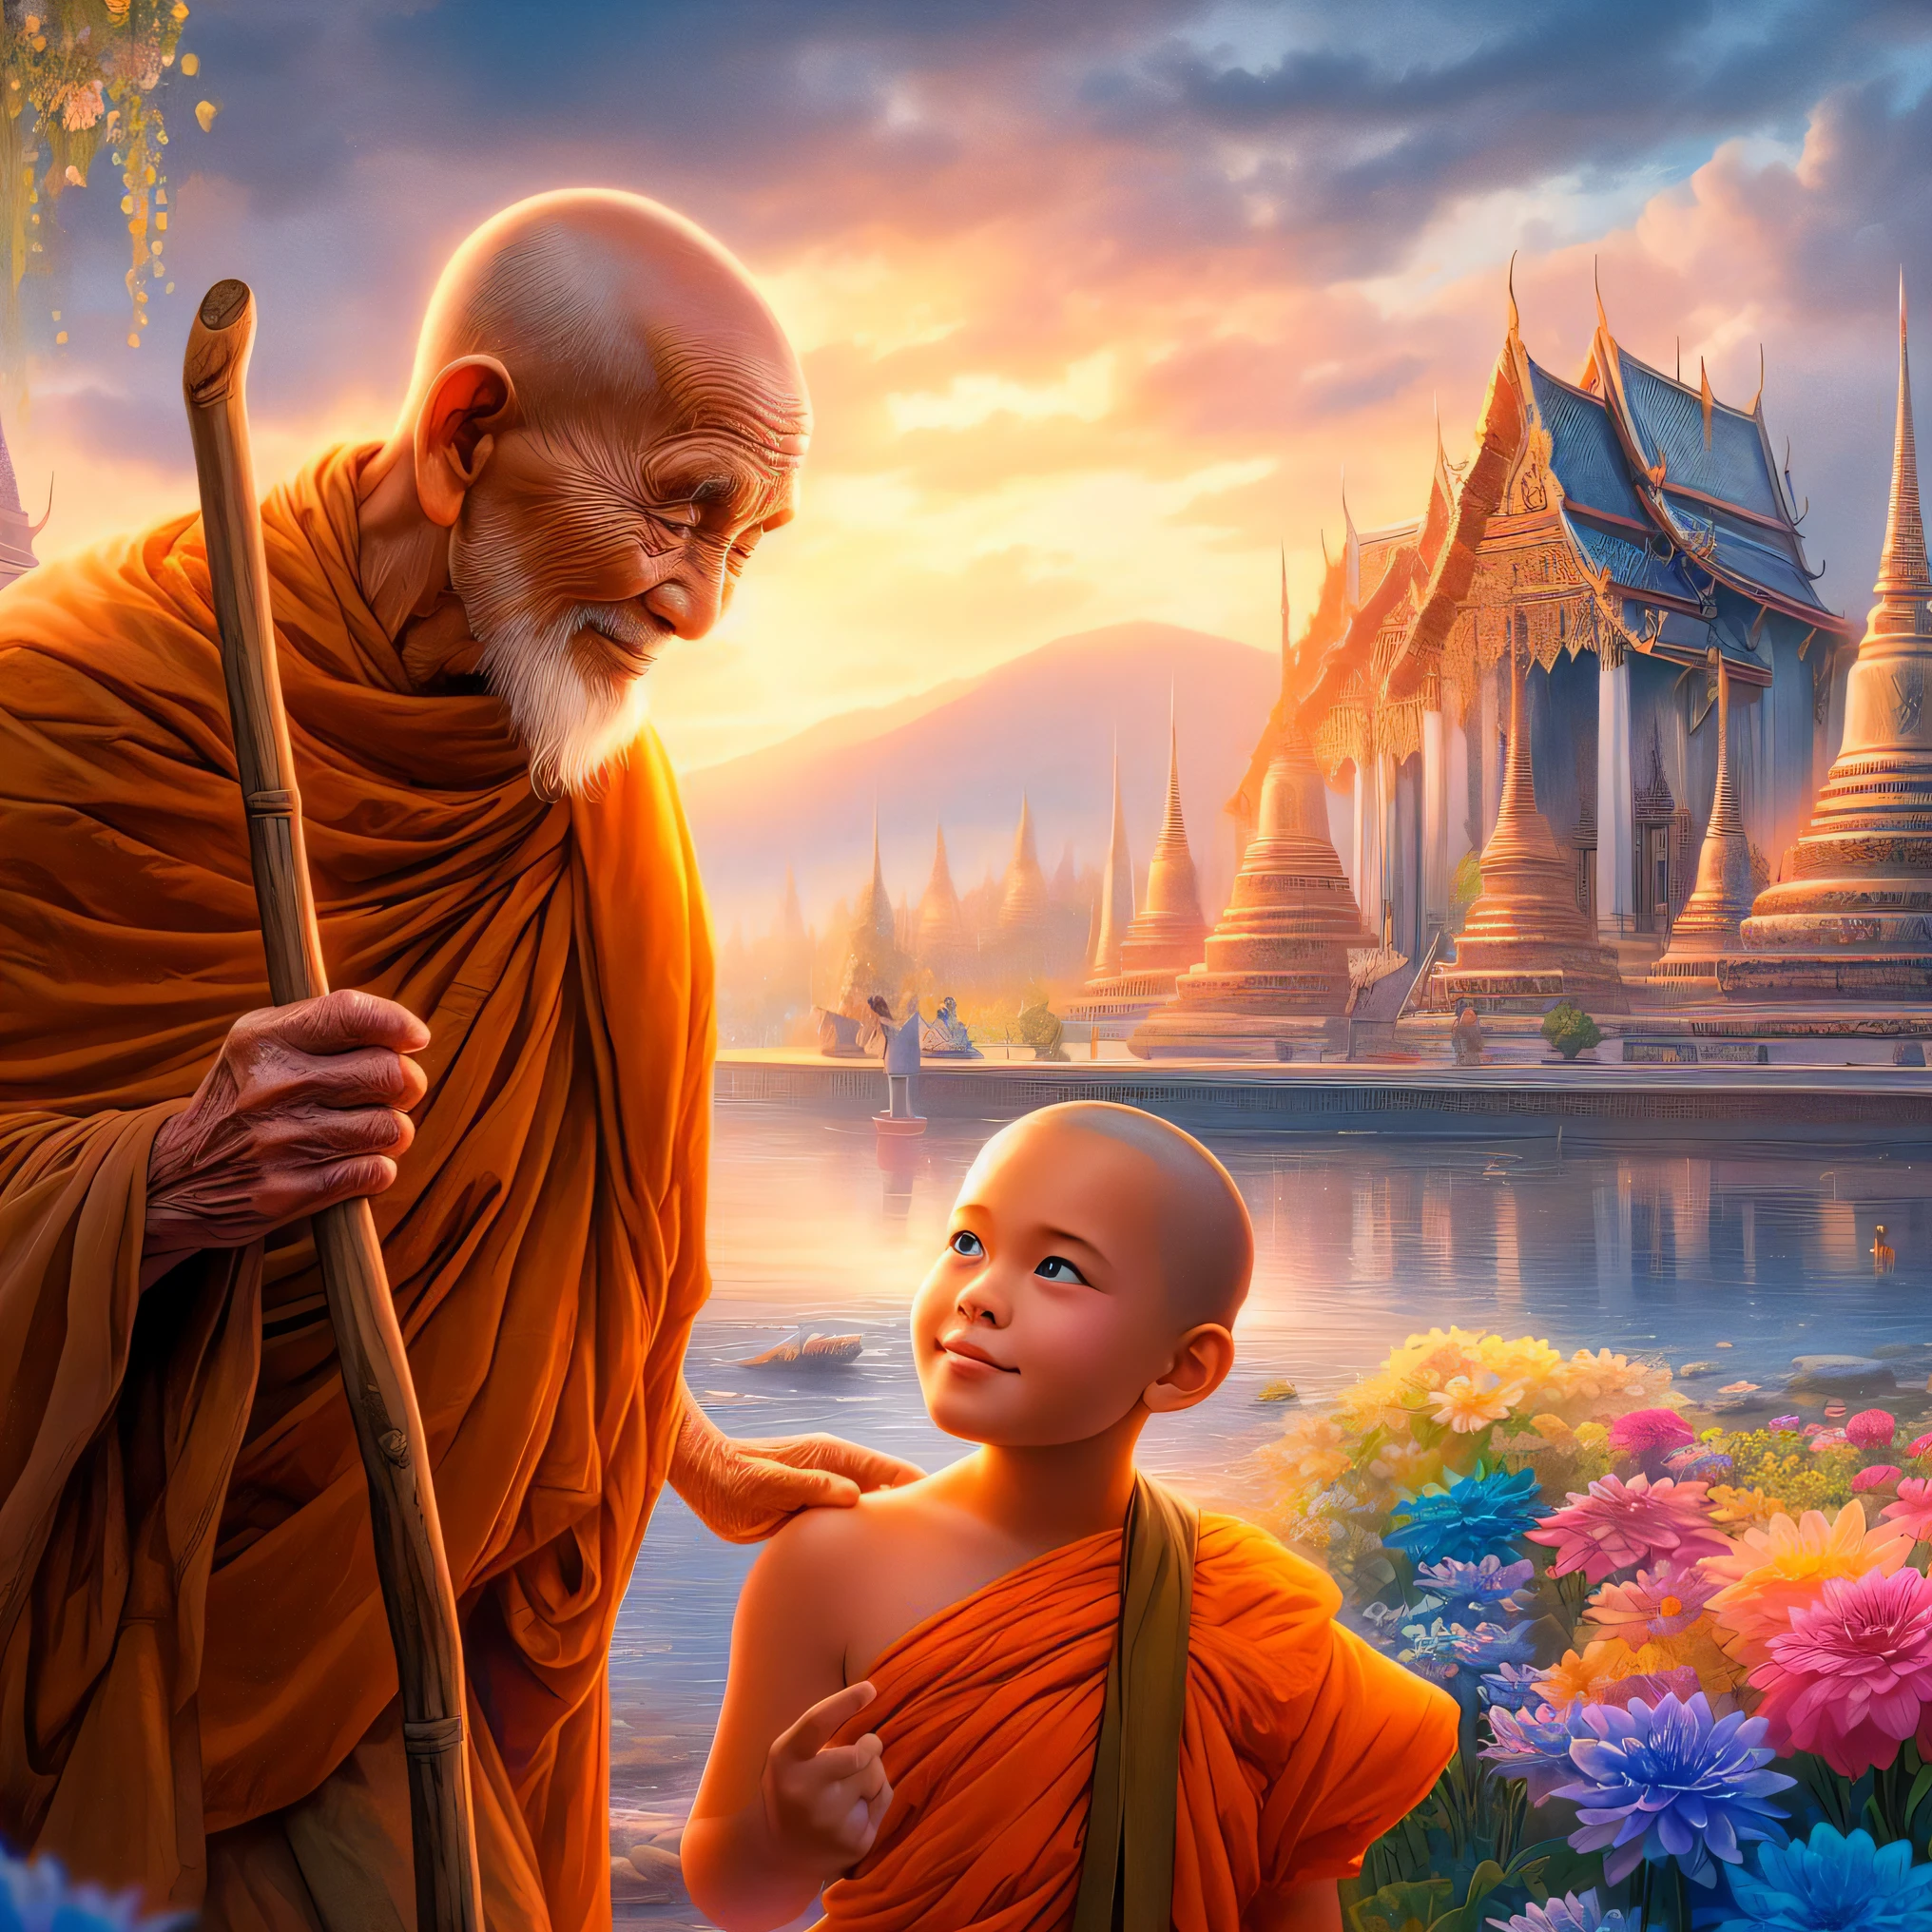 a close up of a  and an older man near a lake, thailand art, on the path to enlightenment, on path to enlightenment, buddhism, buddhist, beautiful depiction, buddhist monk, tithi luadthong, amazing wallpaper, beautiful wallpaper, temple background, monk meditate, amazing depth, monk clothes, very beautiful photo, spiritual enlightenment, beautiful image